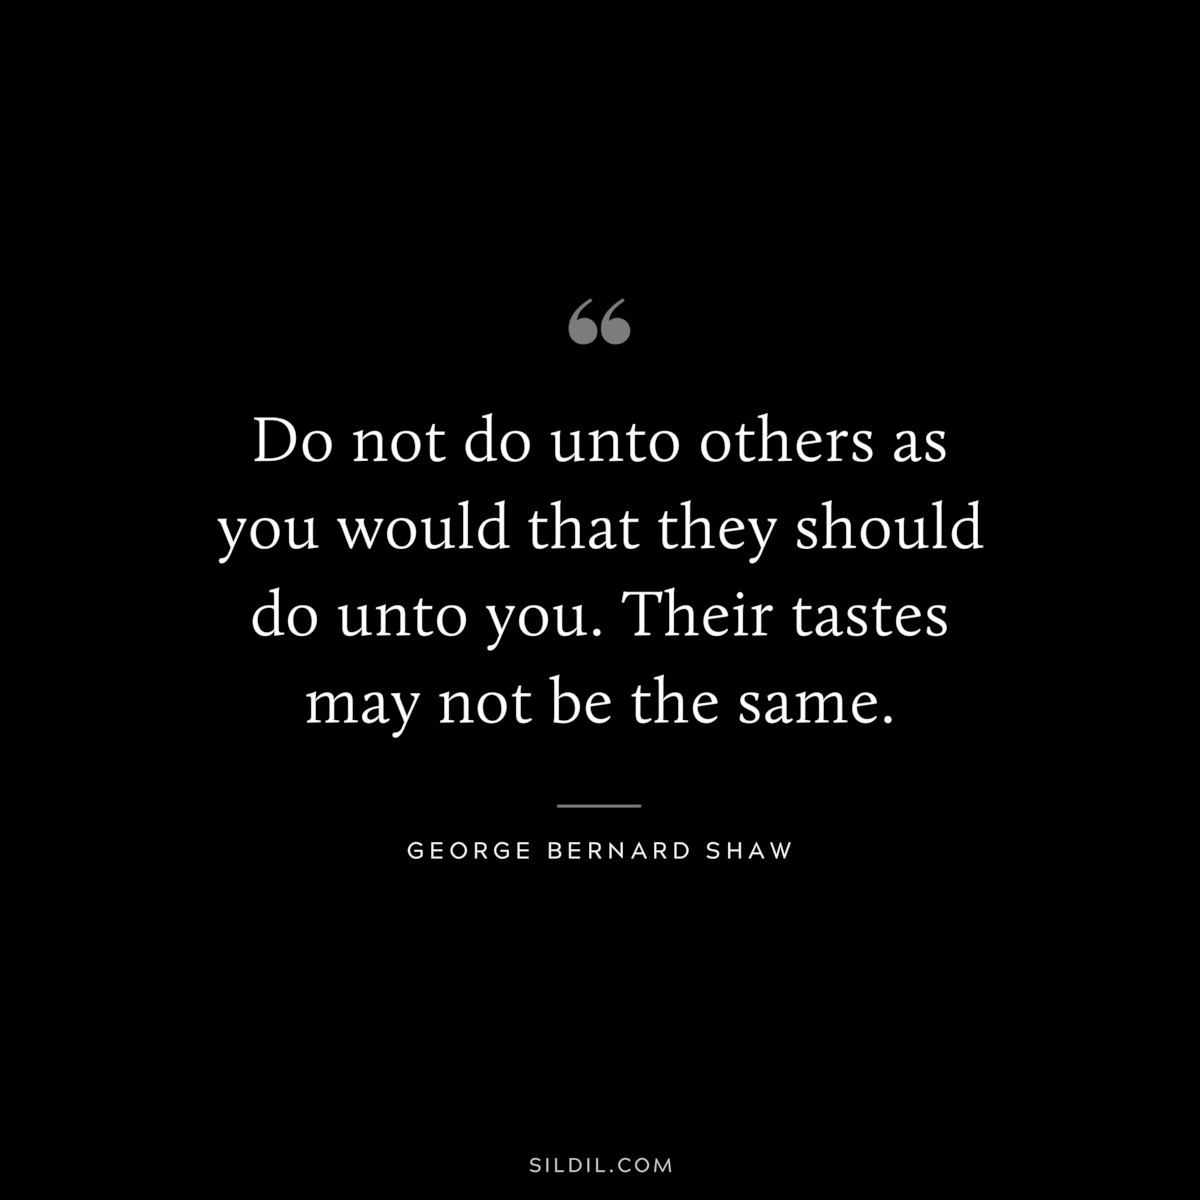 Do not do unto others as you would that they should do unto you. Their tastes may not be the same. ― George Bernard Shaw